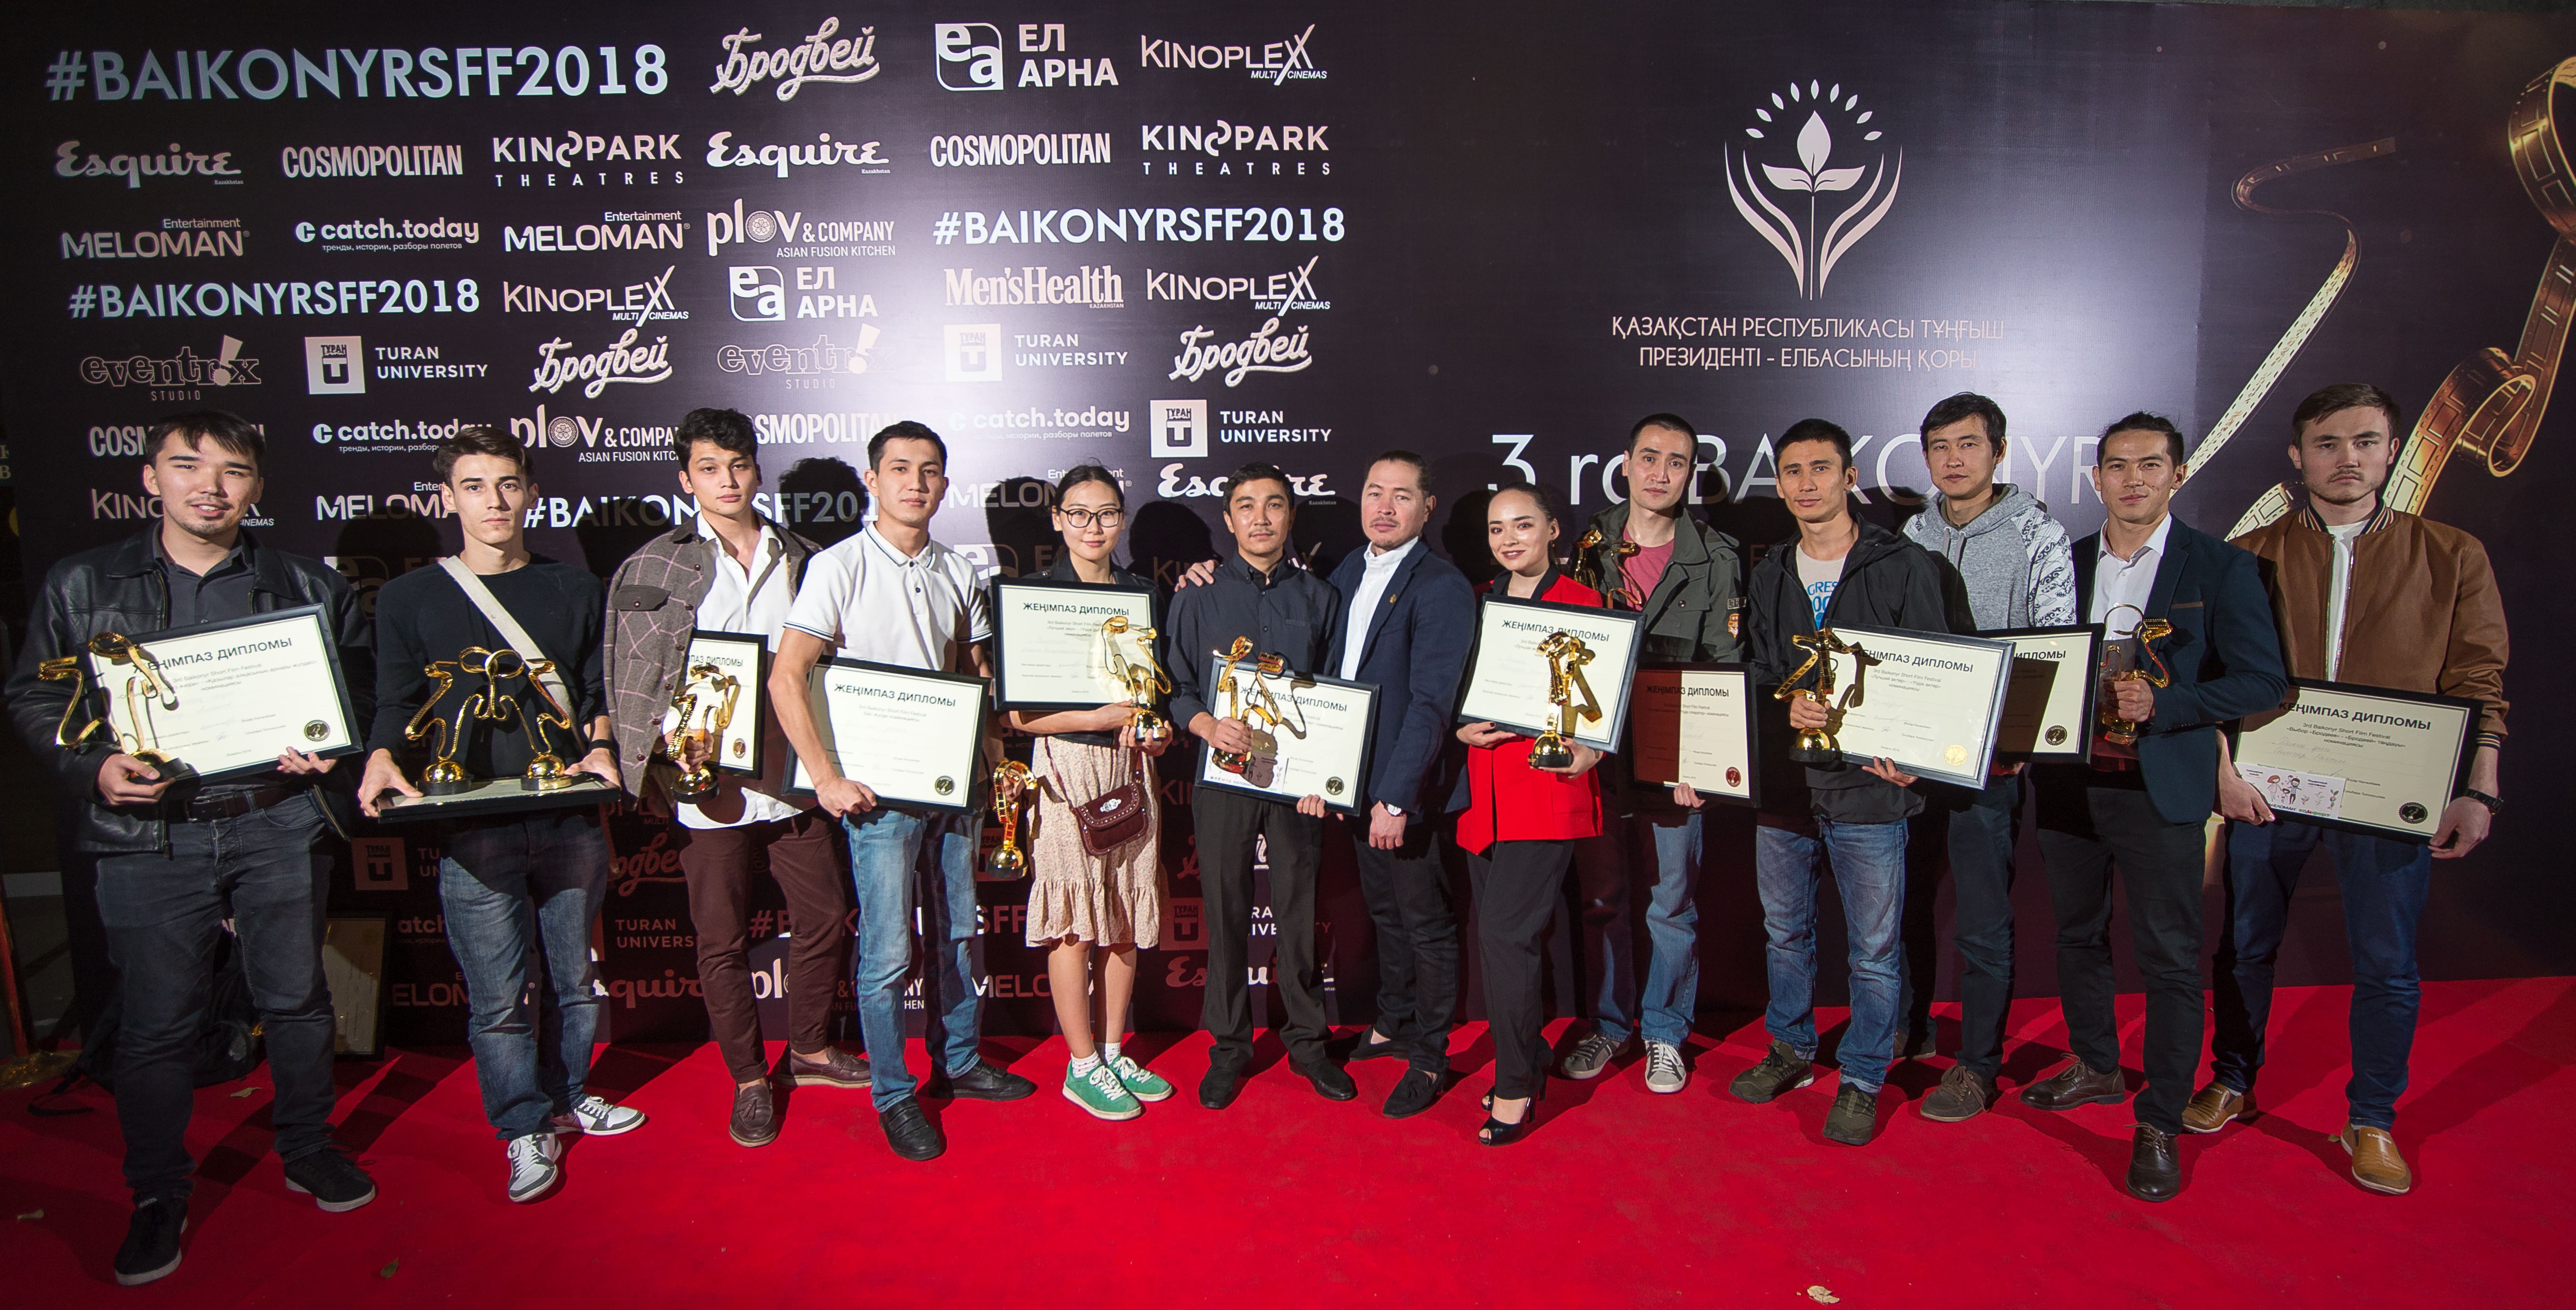 Photography report from the III Baiqonyr Short Film Festival.